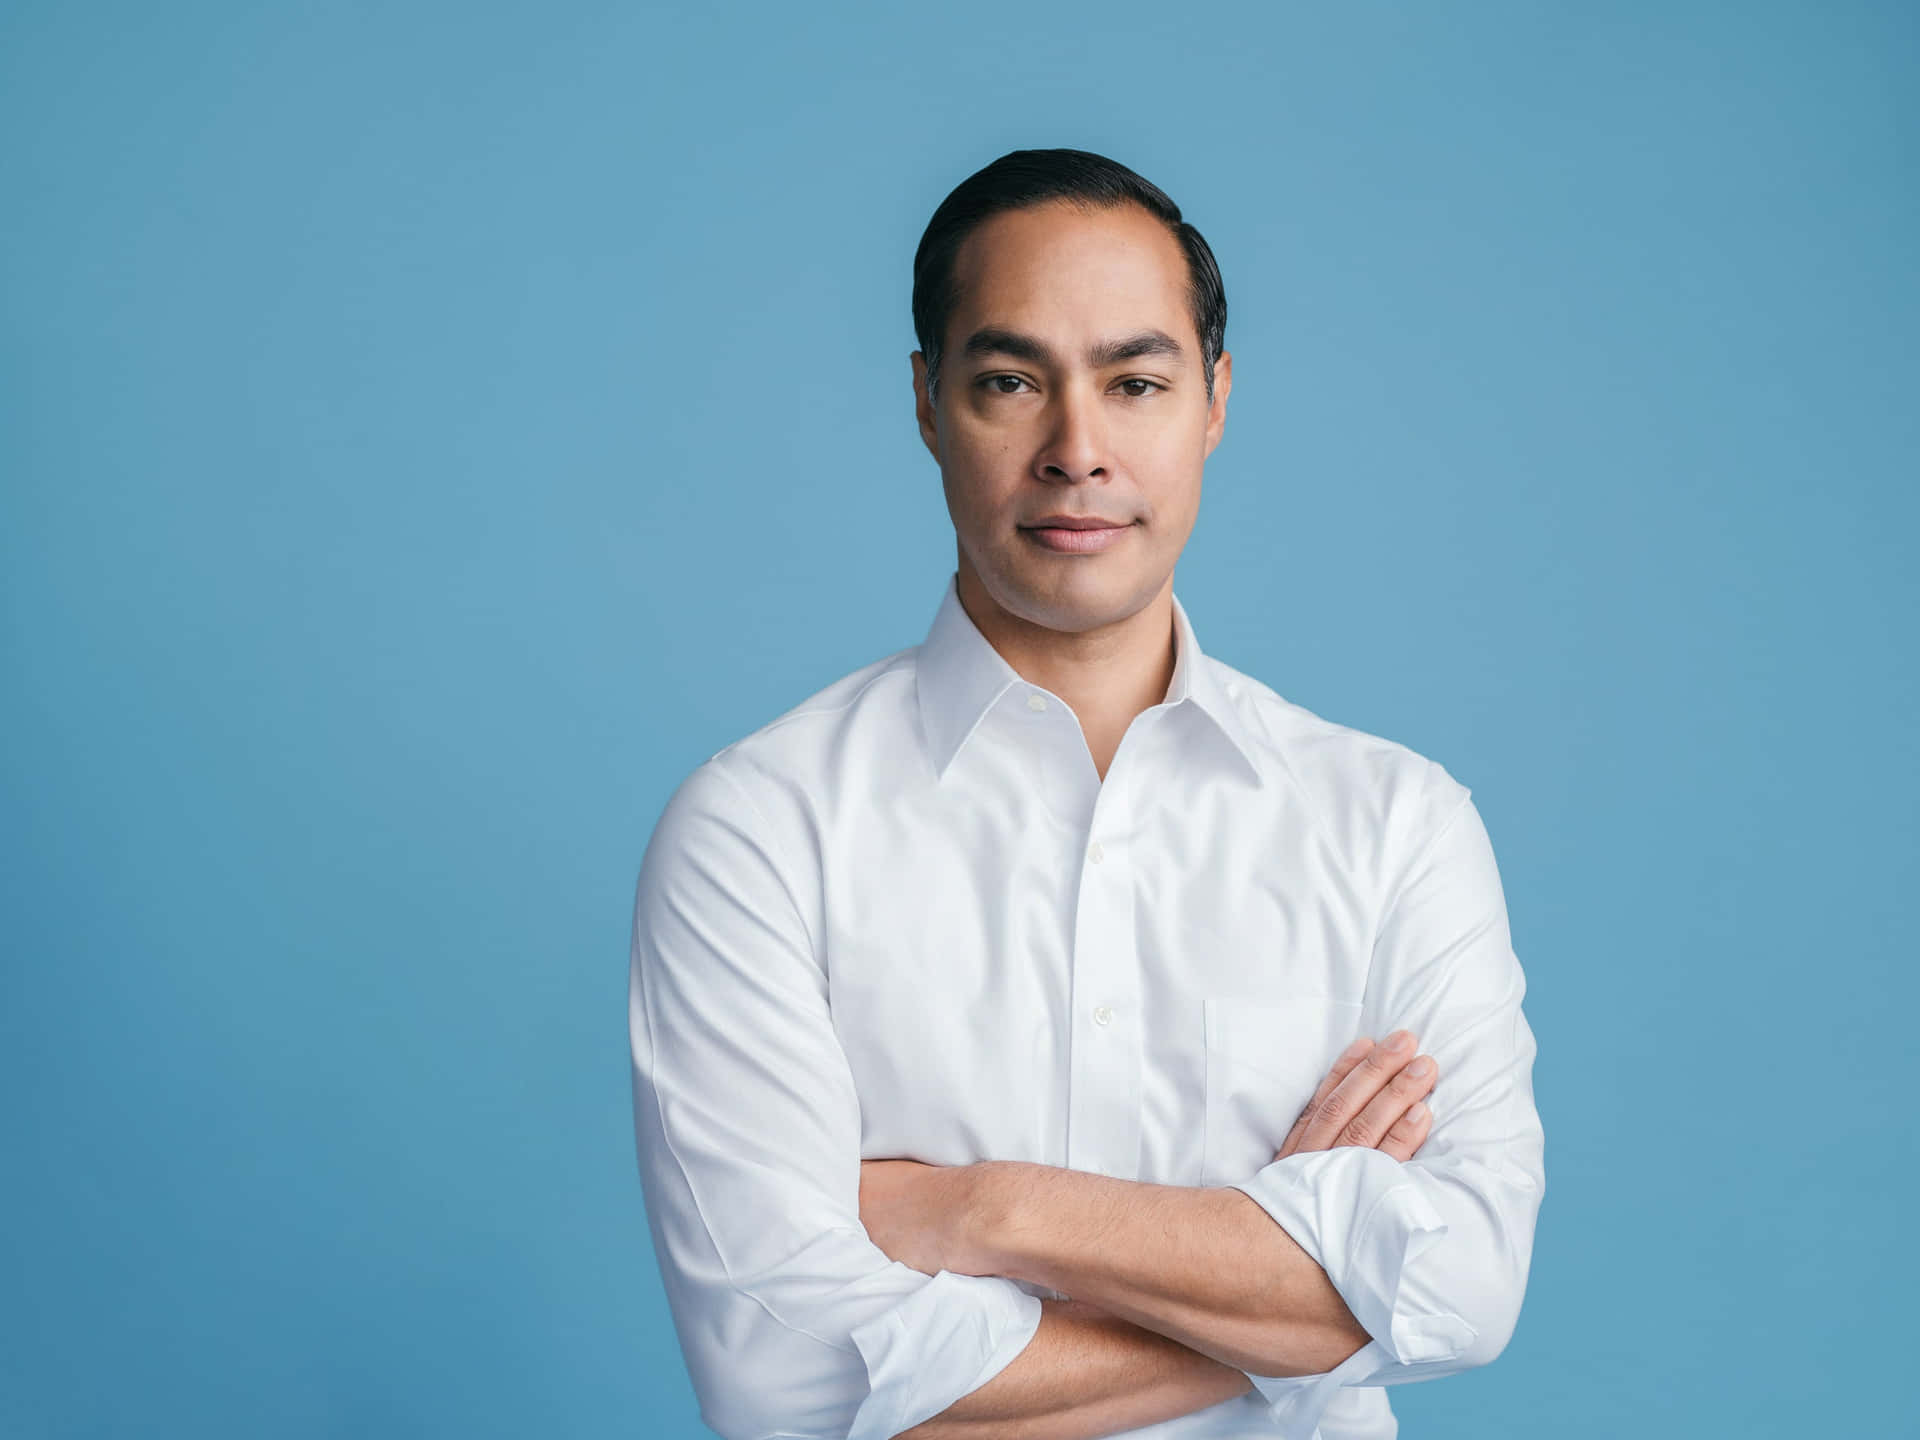 Julian Castro With Blue Background Wallpaper